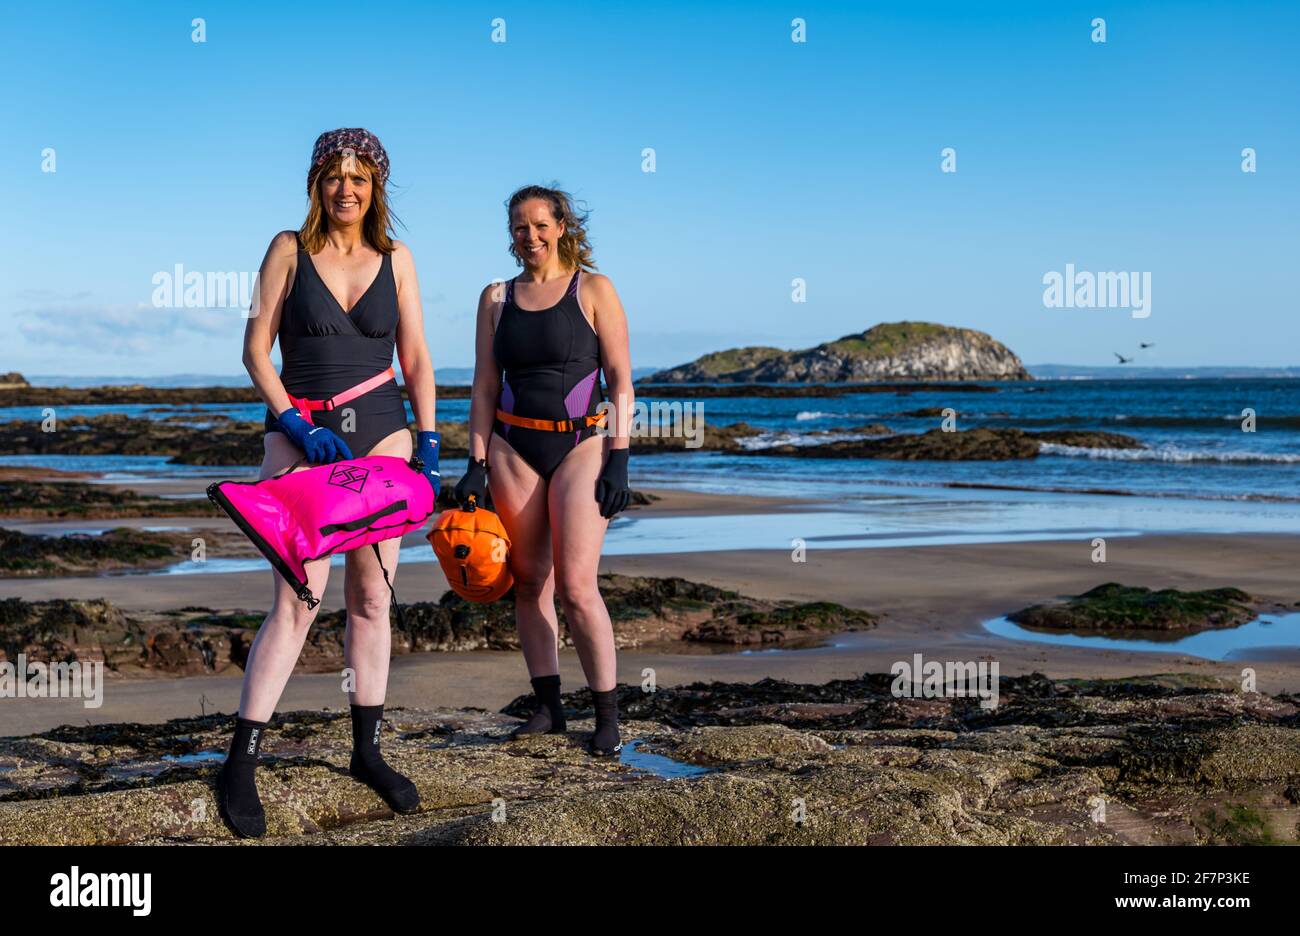 North Berwick, East Lothian, Scotland, United Kingdom, 9th April 2021. Wild swimming fund raising challenge: open water swimmer Rebecca Rennie is undertaking a 24 day challenge, swimming each day until April 24th, to raise money for Edinburgh Women’s Aid via the virtual Kilt Walk. She is joined by various friends each day. North Berwick was recently deemed the best place to live in Scotland; bays for swimming are one of its attractions Stock Photo